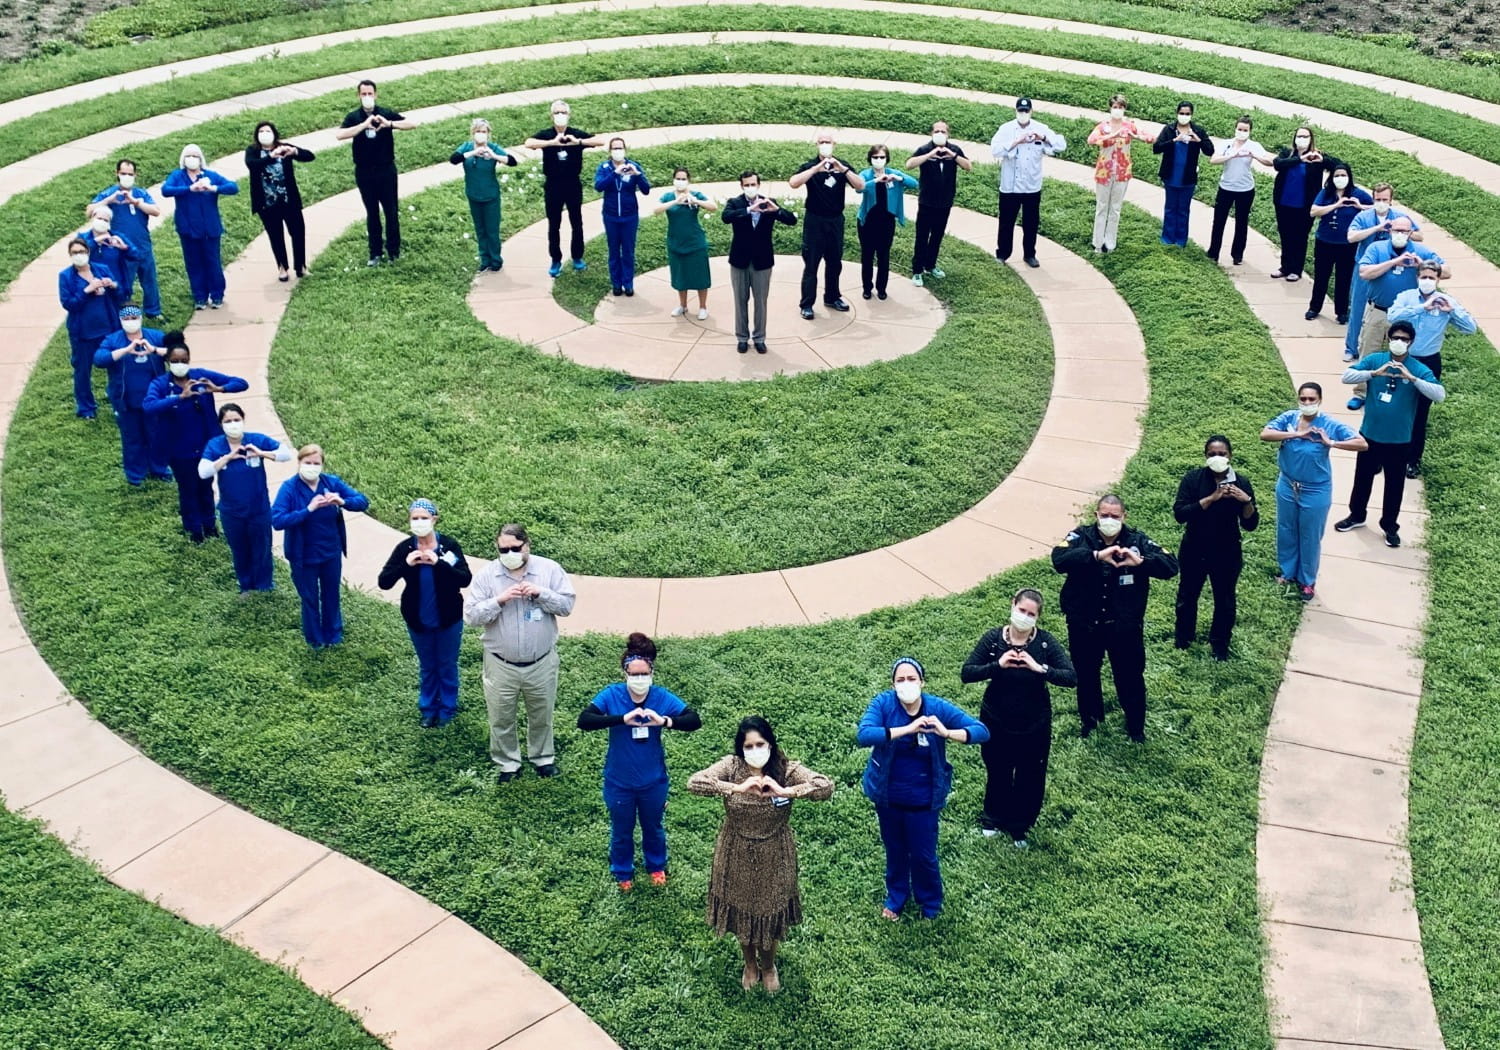  Employees at Texas Health Resources show their heart in group photo